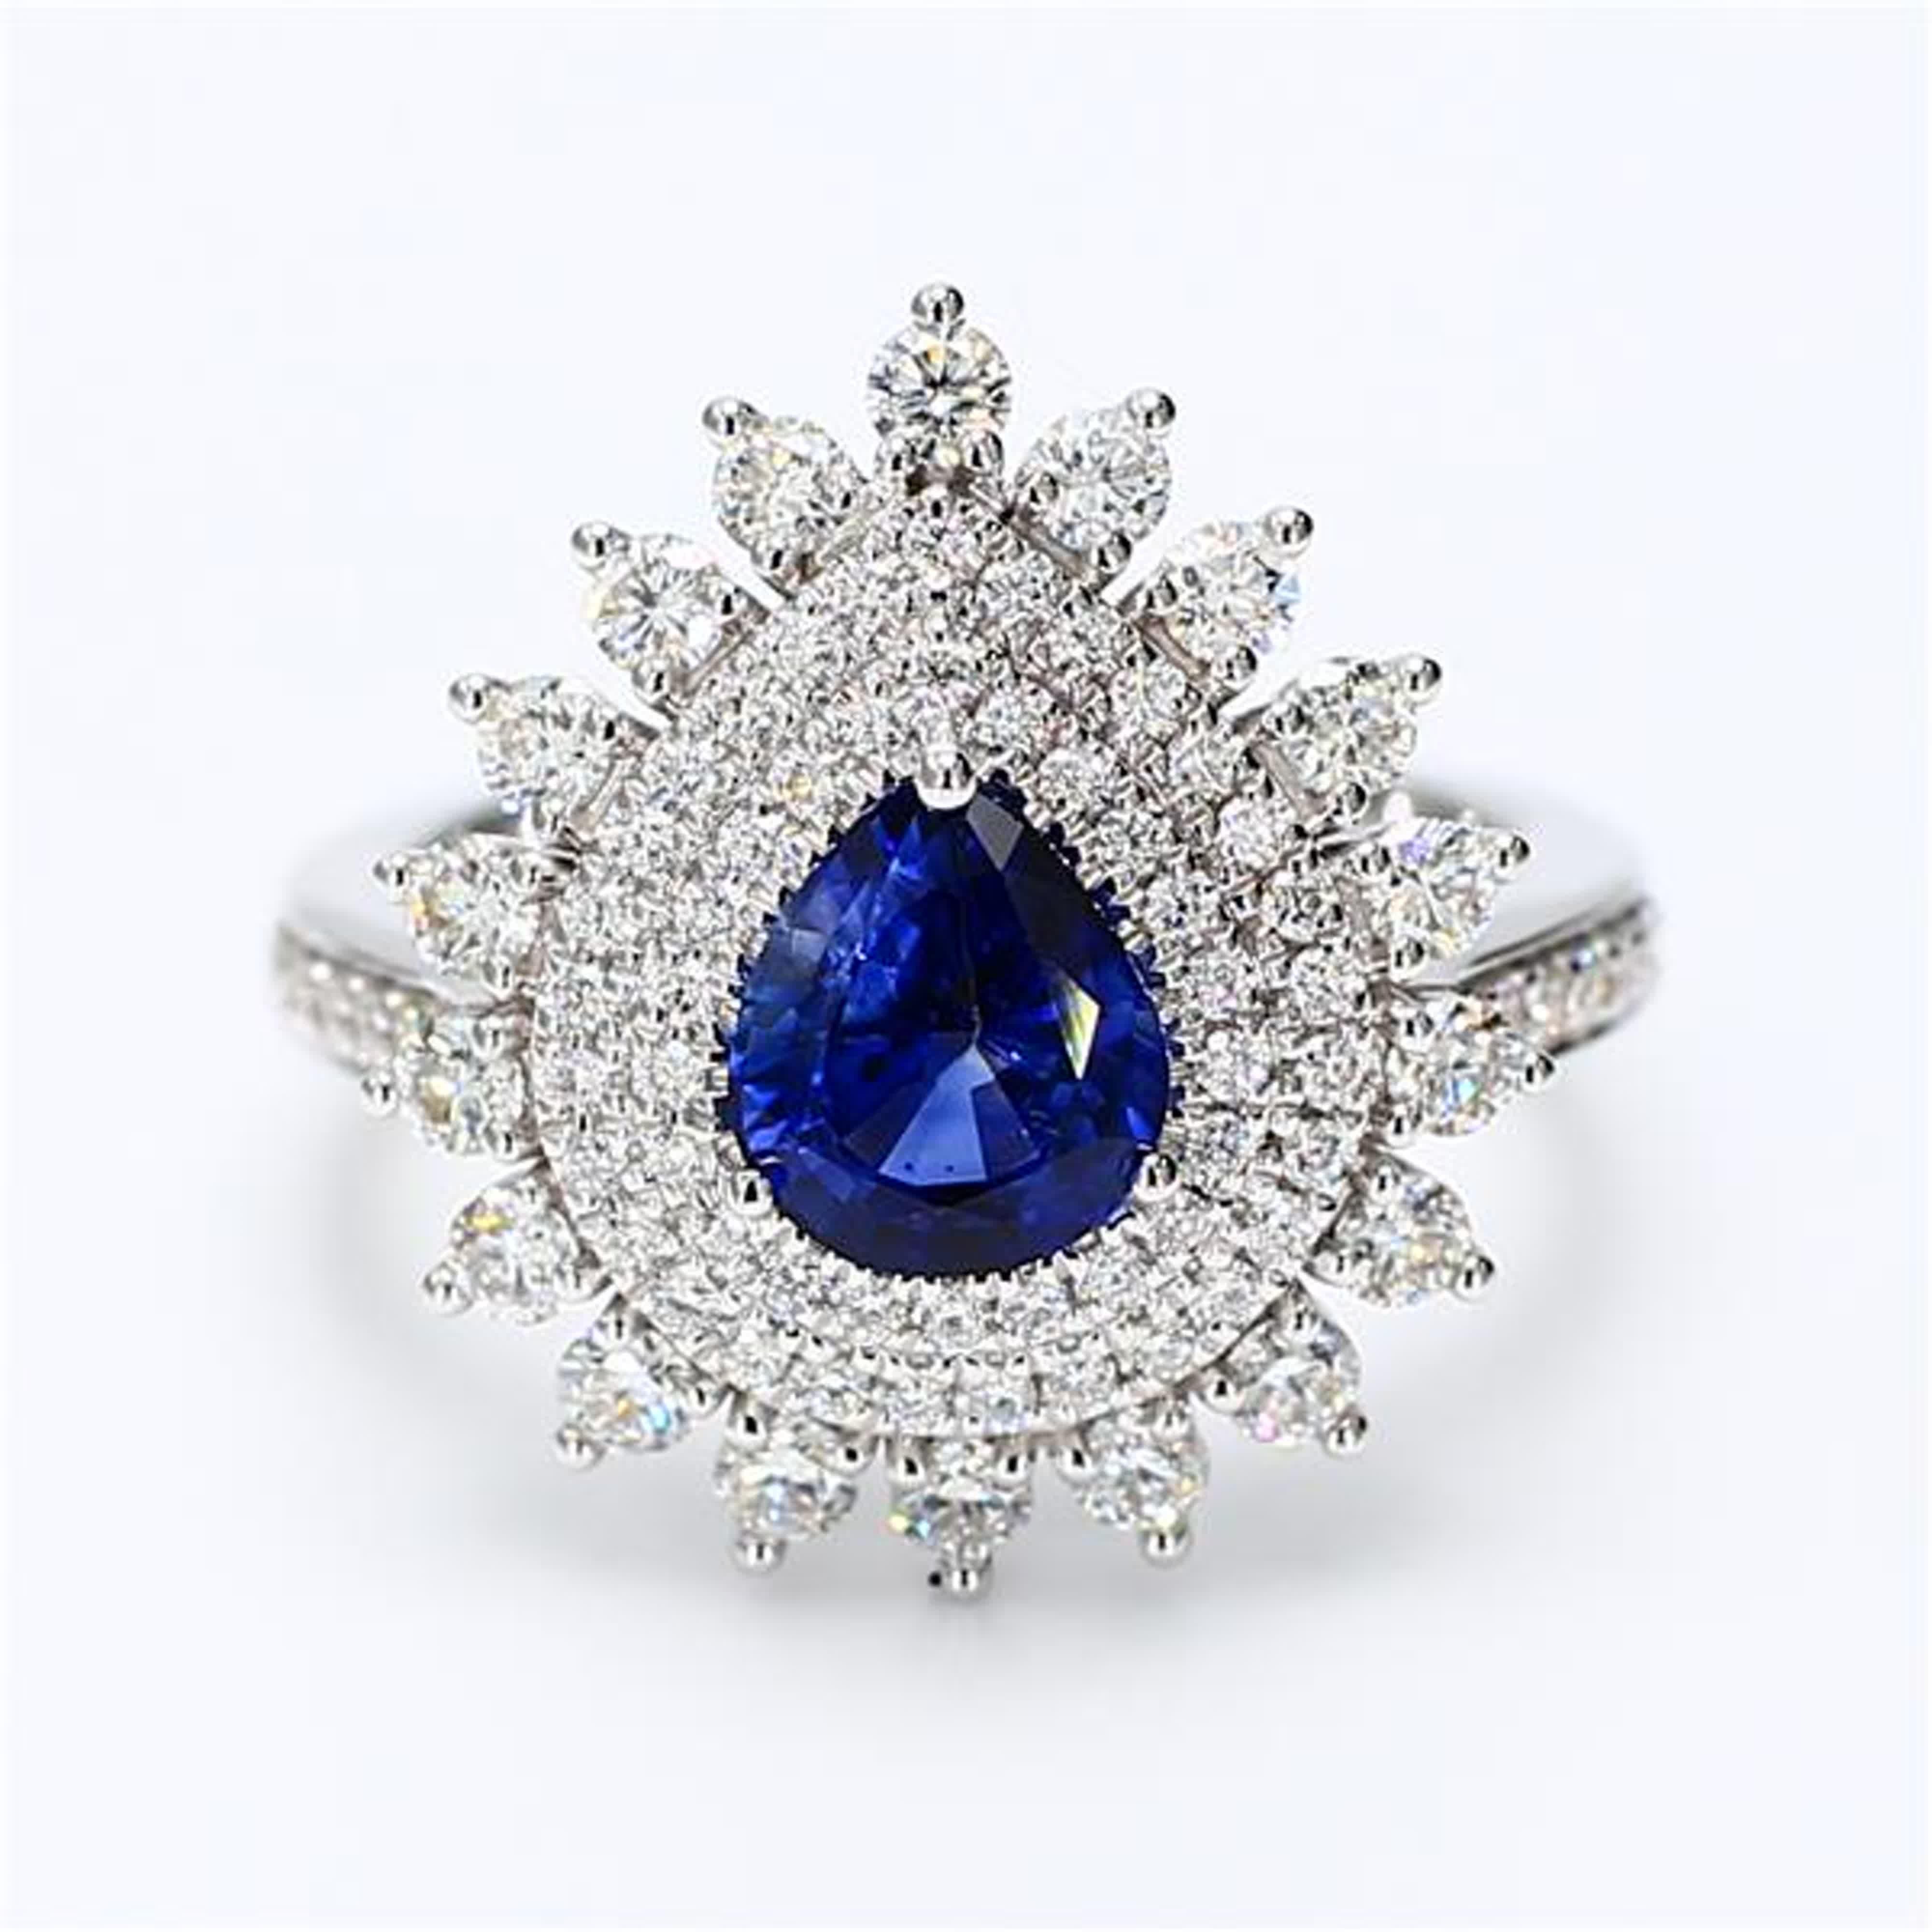 RareGemWorld's classic natural pear cut sapphire ring. Mounted in a beautiful 18K White Gold setting with a natural pear cut blue sapphire. The sapphire is surrounded by natural round white diamond melee. This ring is guaranteed to impress and